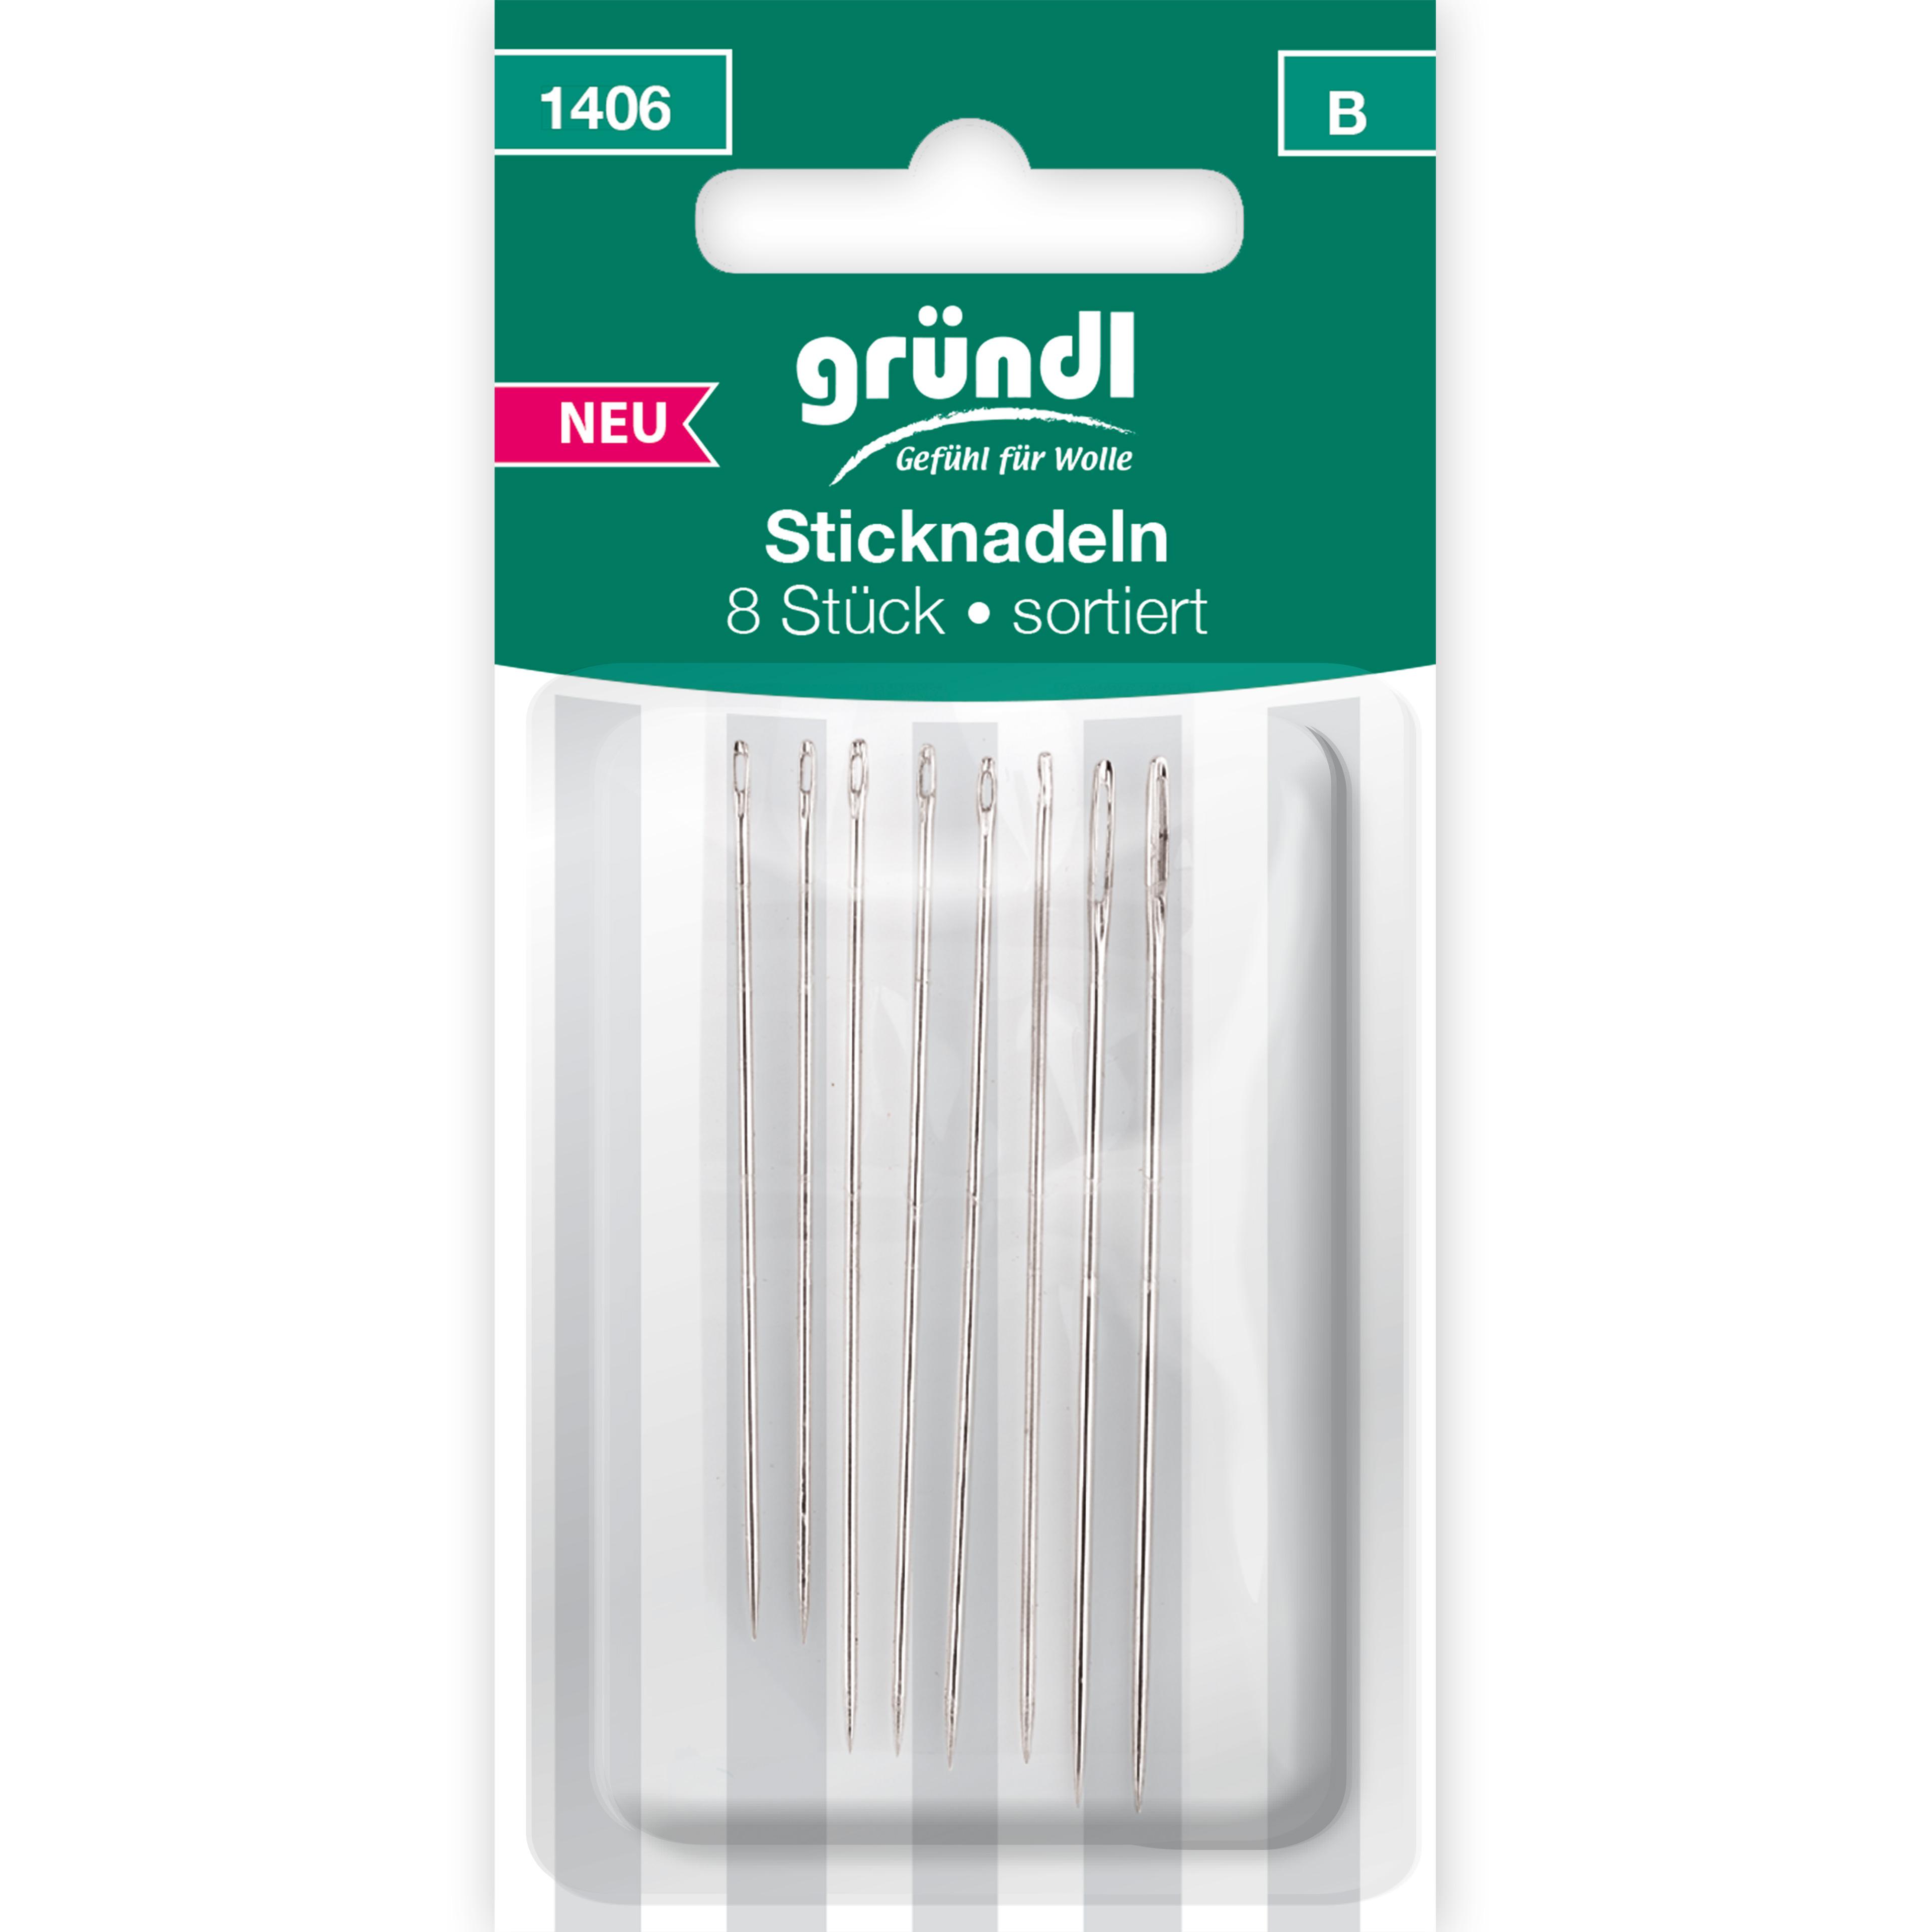 Embroidery needles with point – 8 pcs